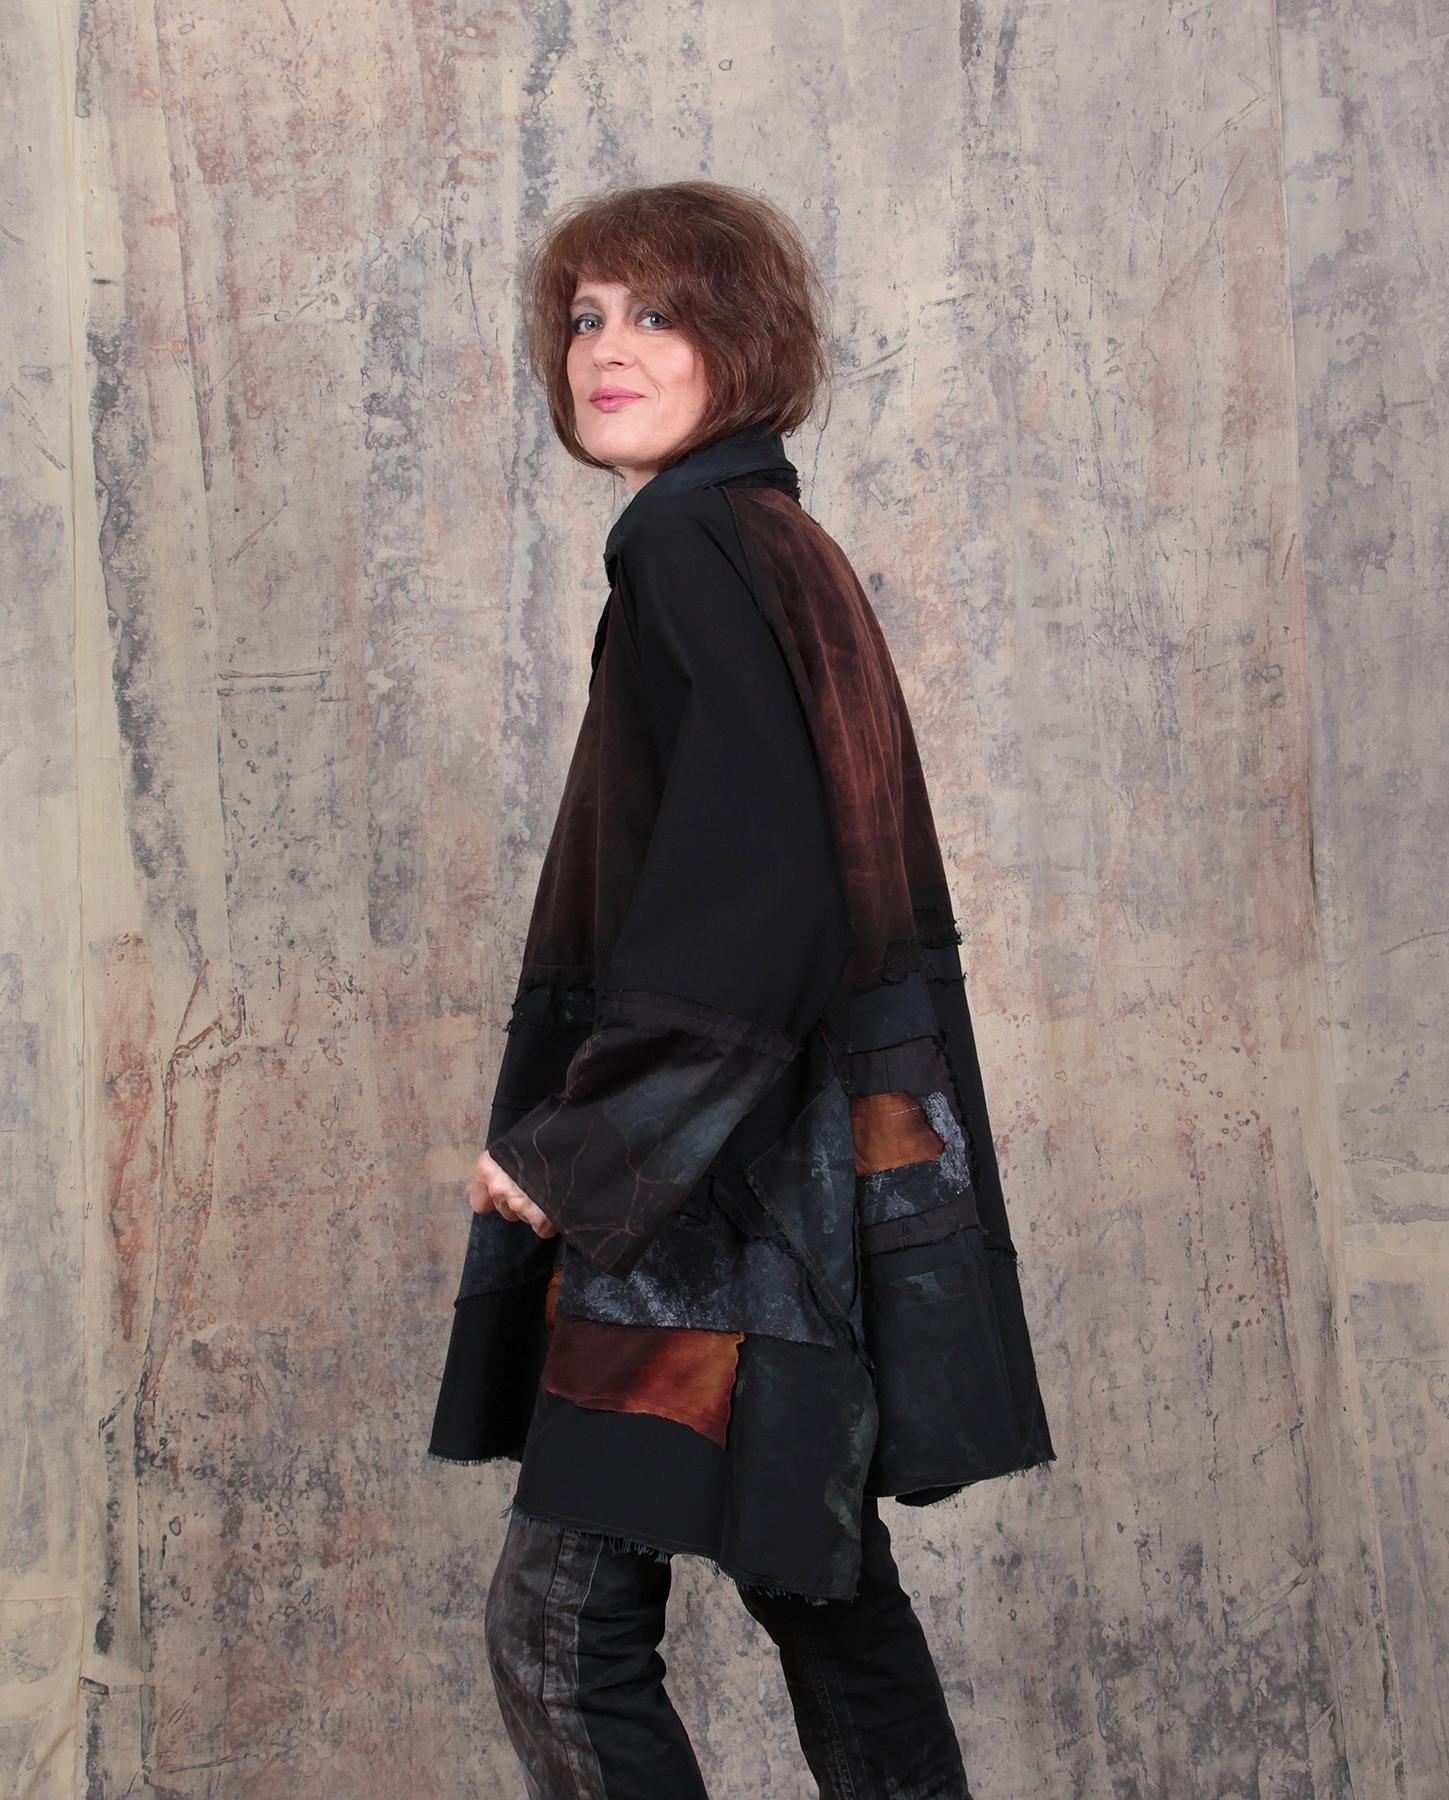 Art-to-Wear by Tatiana Palnitska - roomy black jacket with a touch of color